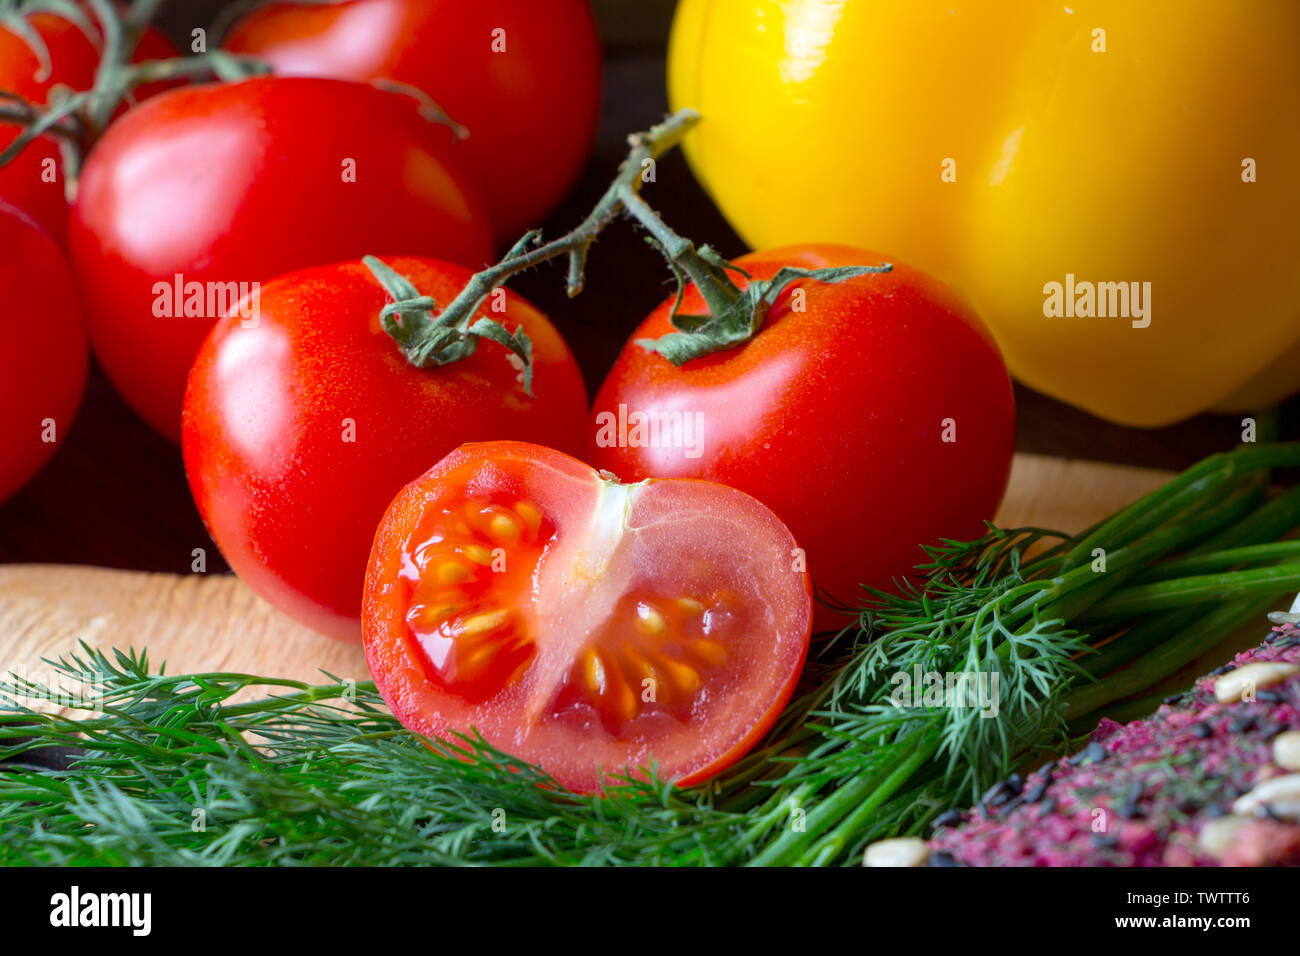 Ripe red slice of tomato with green dill and sweet yellow pepper on kitchen board. Close up. Healthy nutrition concept. Raw foods. Stock Photo